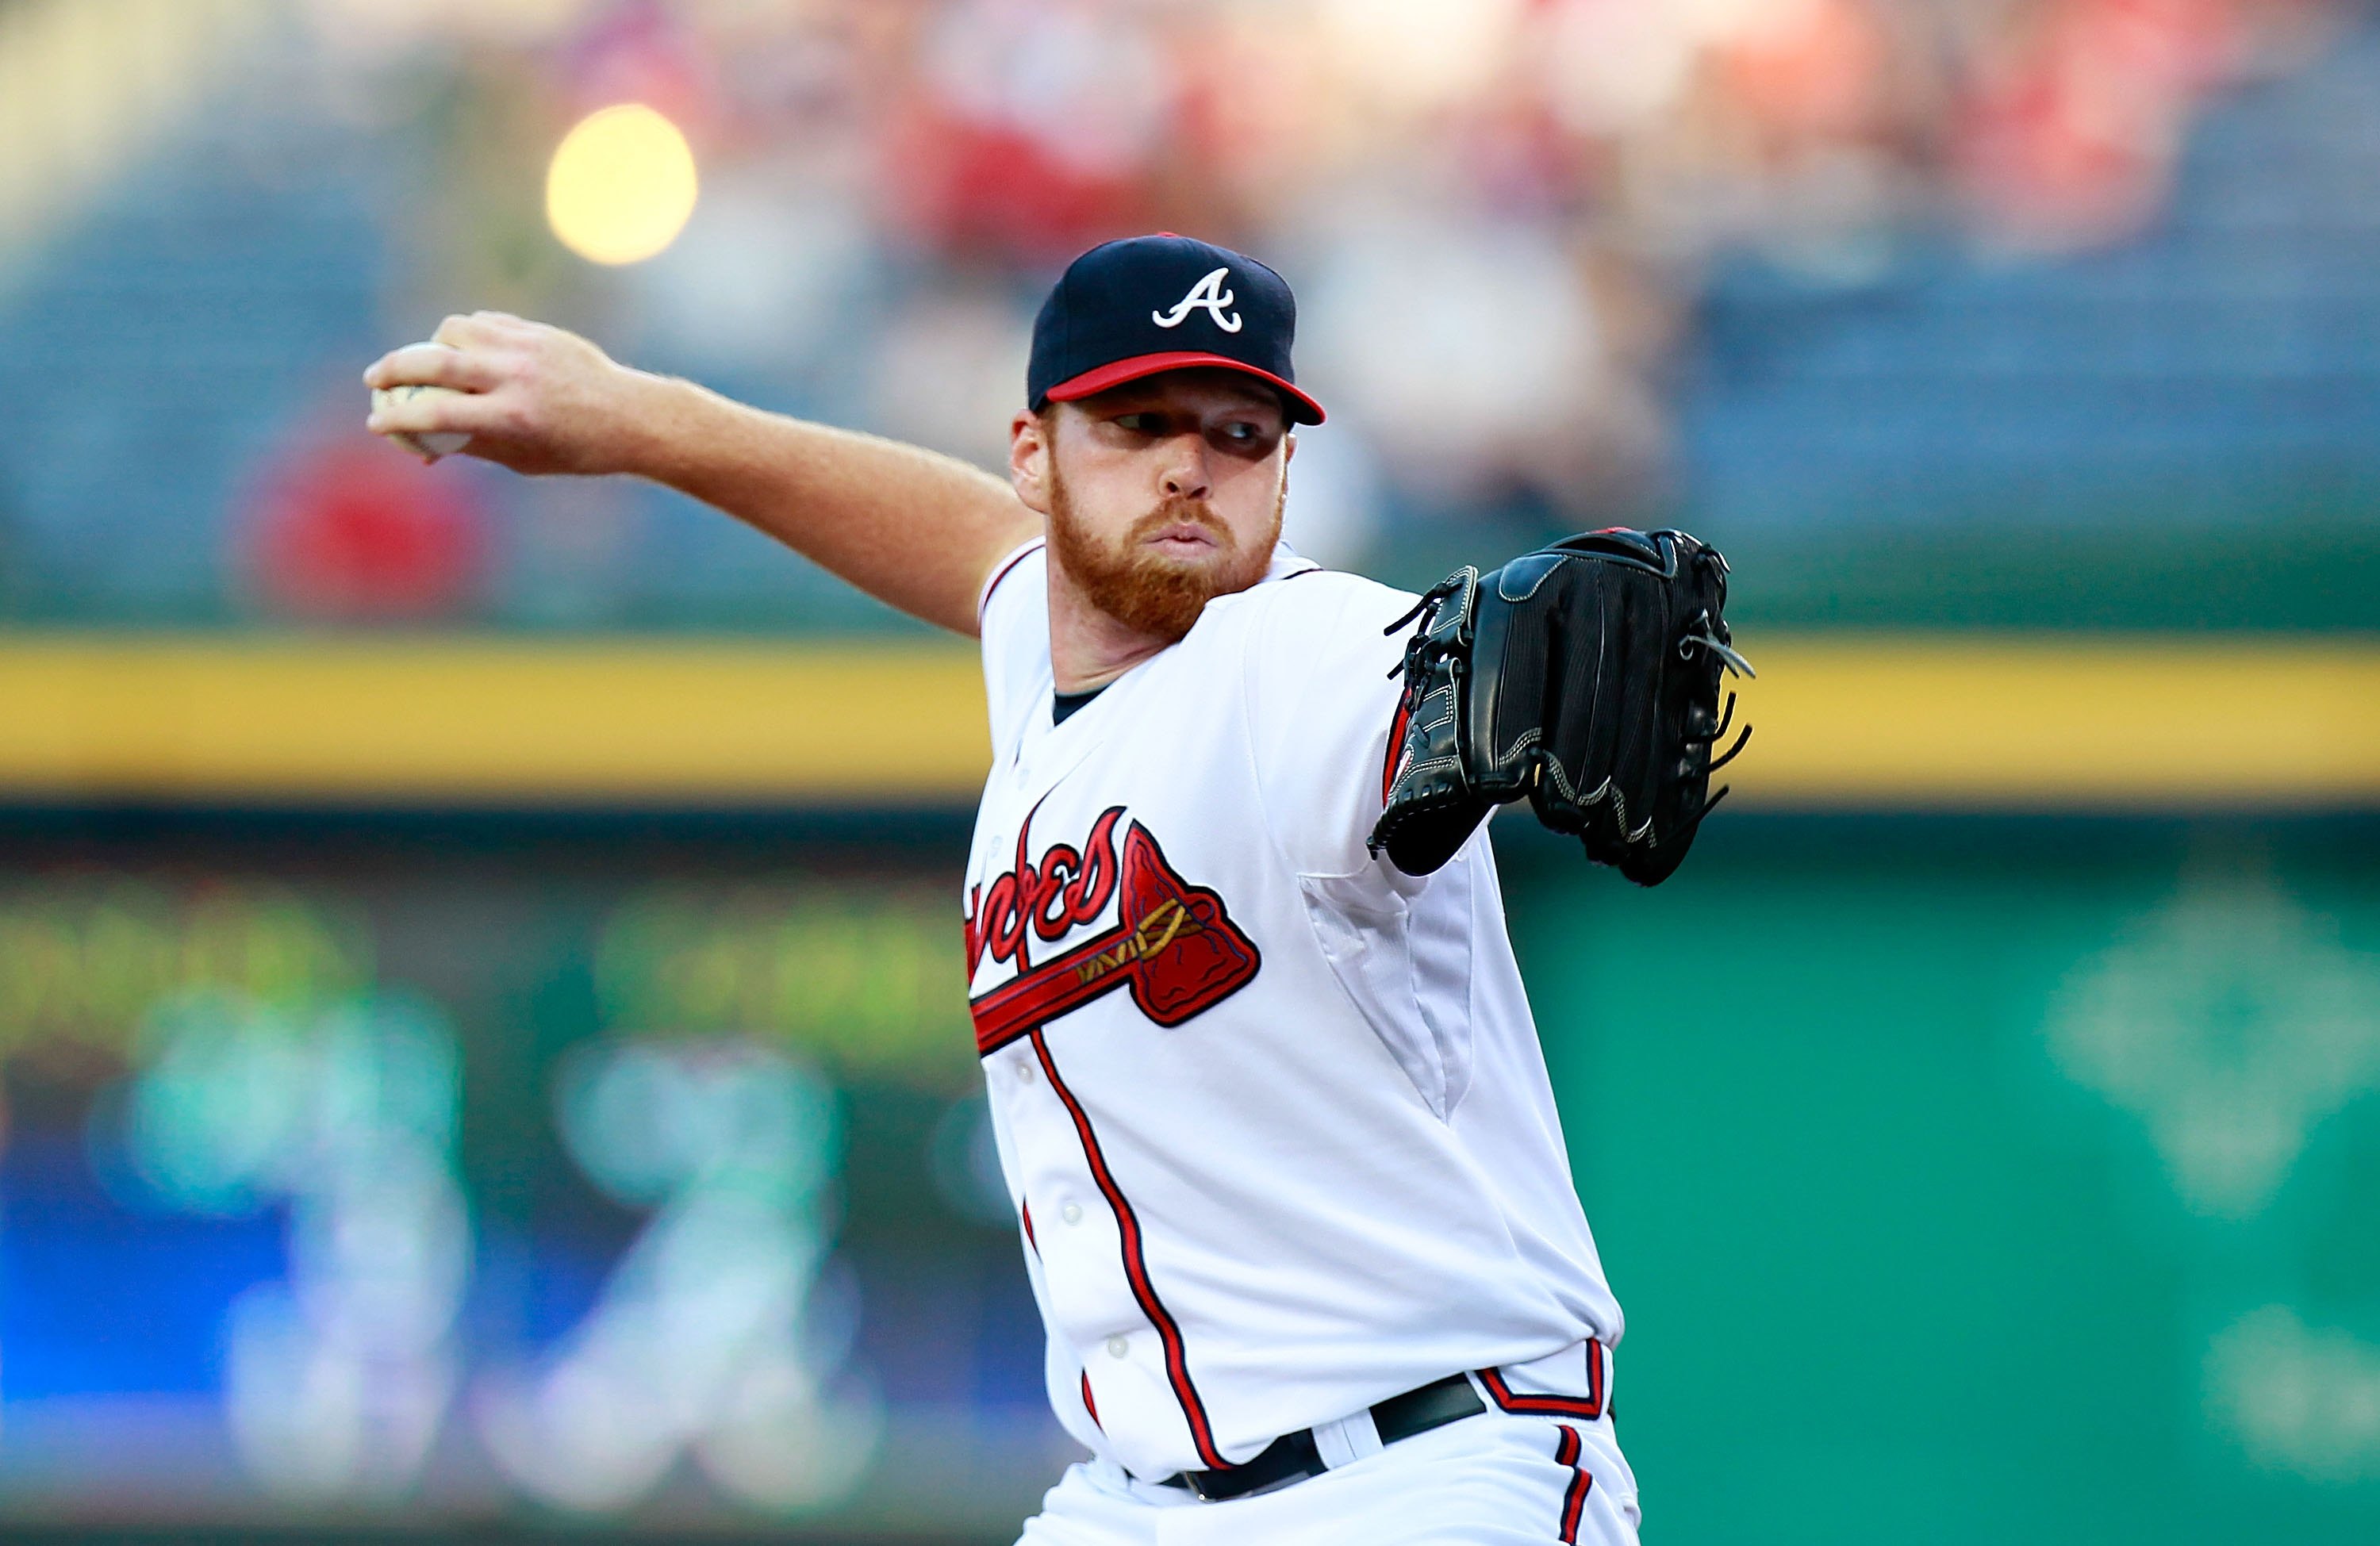 ATLANTA - SEPTEMBER 01:  Pitcher Tommy Hanson #48 of the Atlanta Braves against the New York Mets at Turner Field on September 1, 2010 in Atlanta, Georgia.  (Photo by Kevin C. Cox/Getty Images)